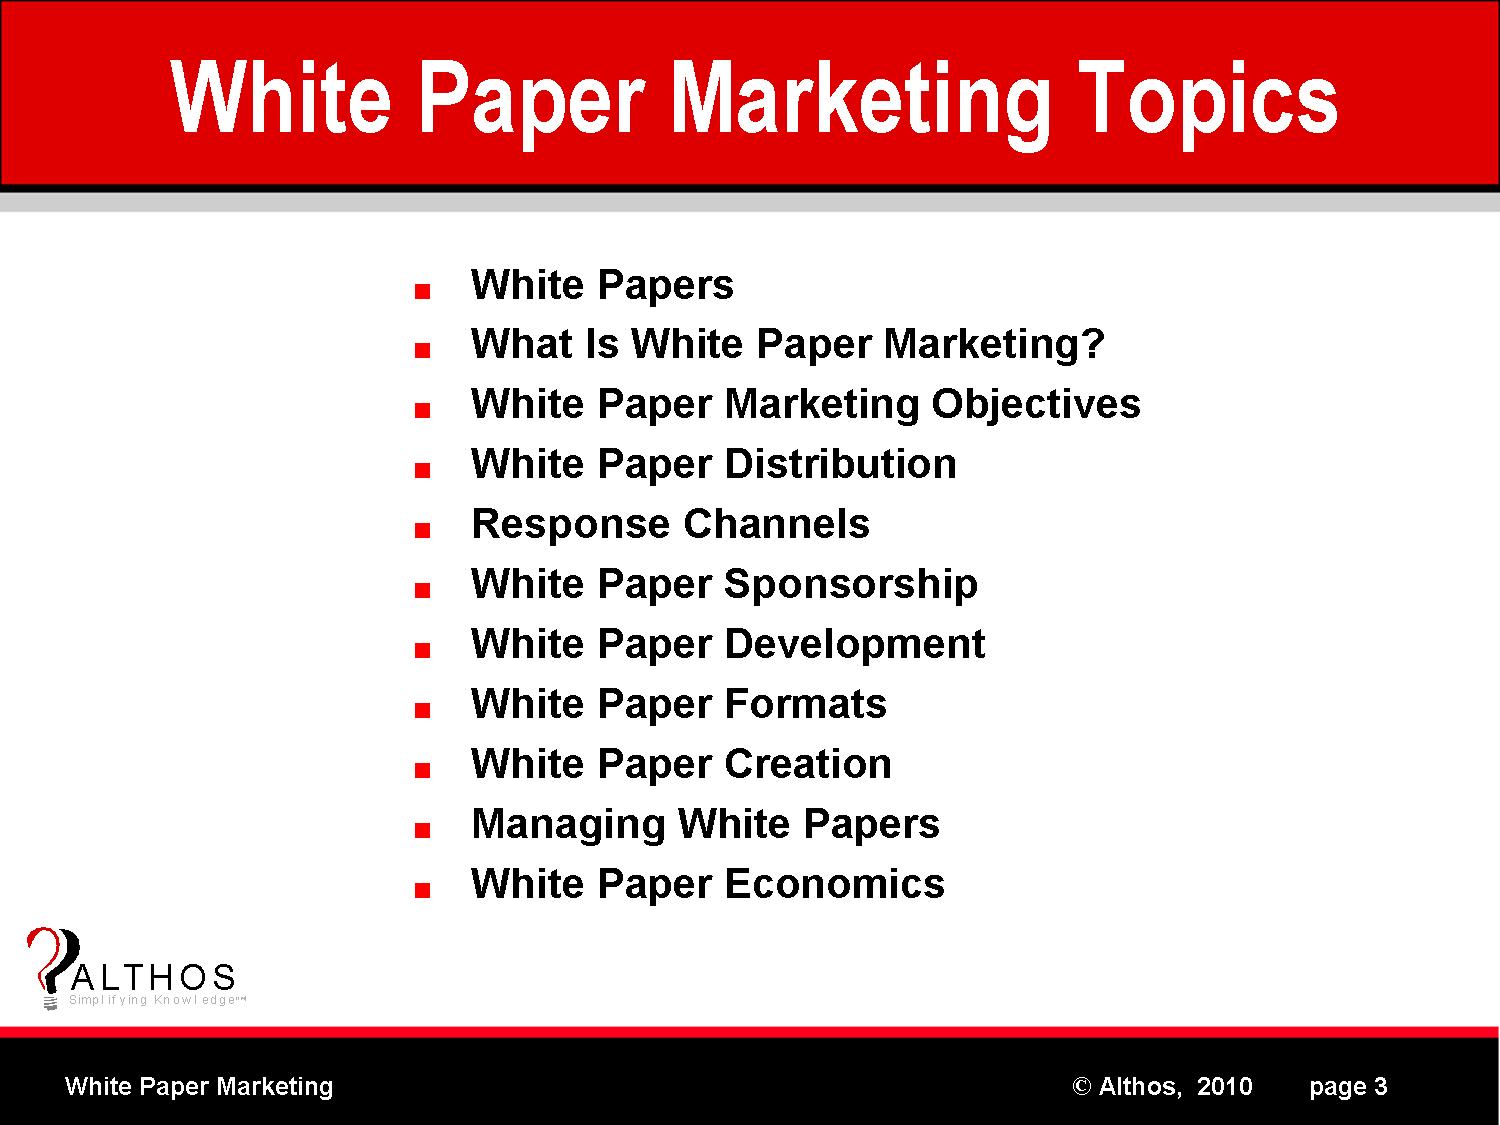 A paper on marketing